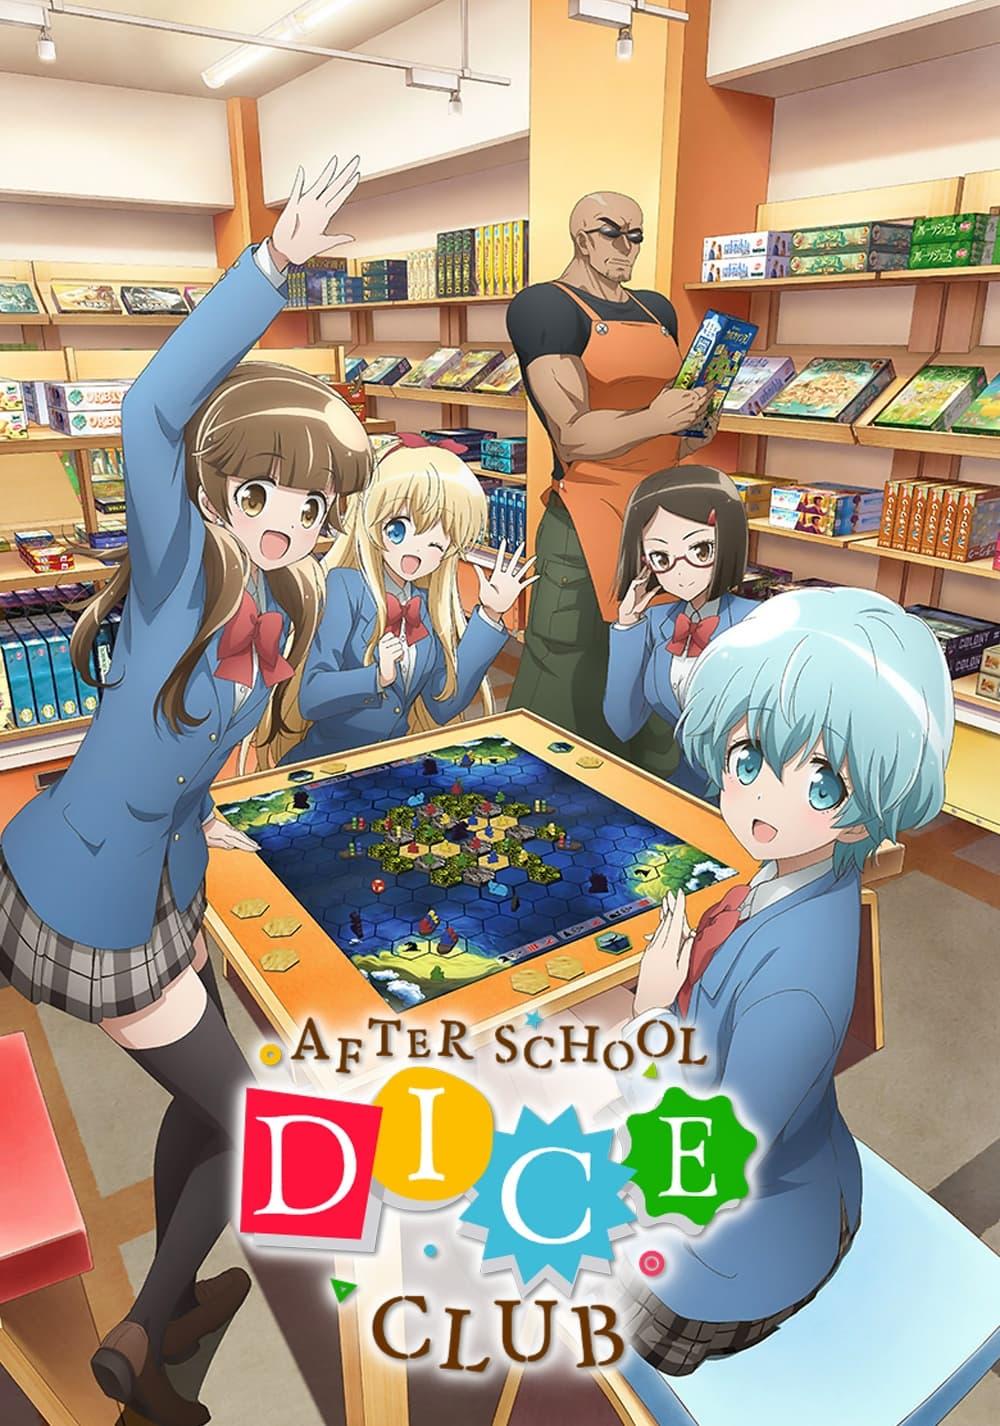 After School Dice Club poster